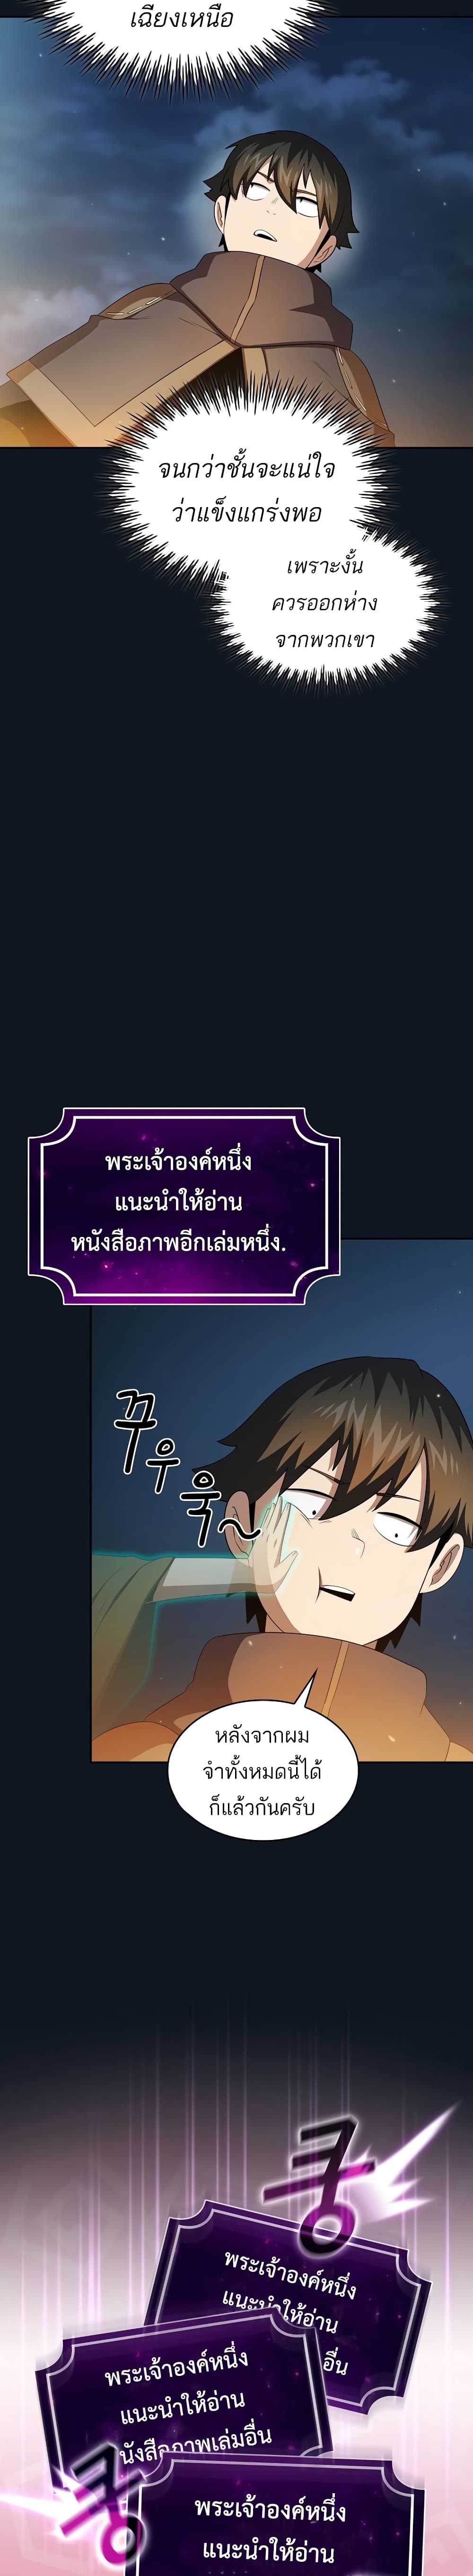 Is This Hero for Real à¸à¸­à¸à¸à¸µà¹ 33 (17)